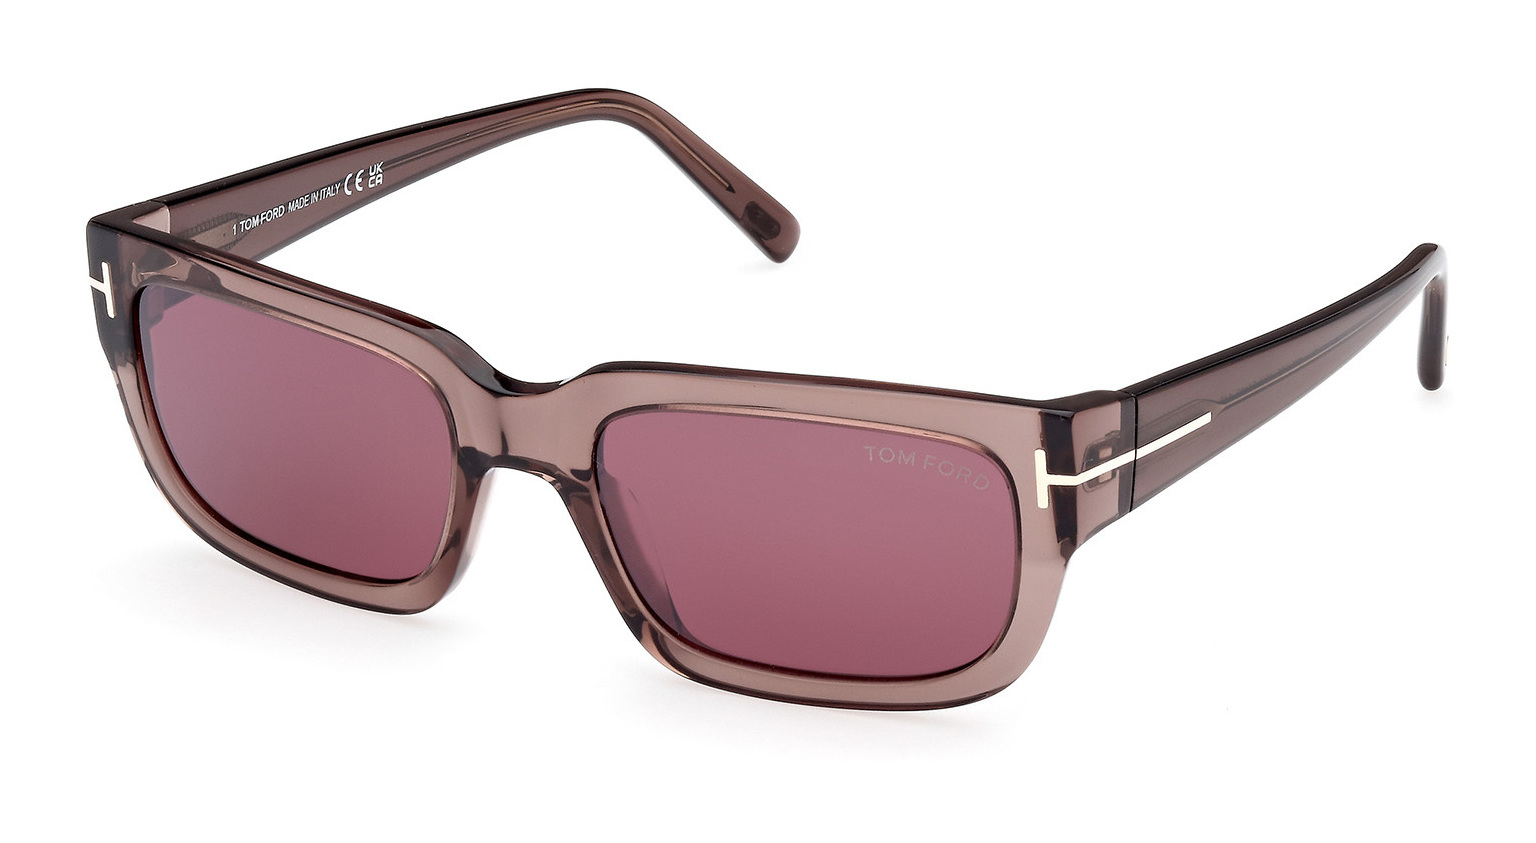 tom_ford_ft1075_shiny_light_brown___bordeaux_mirror